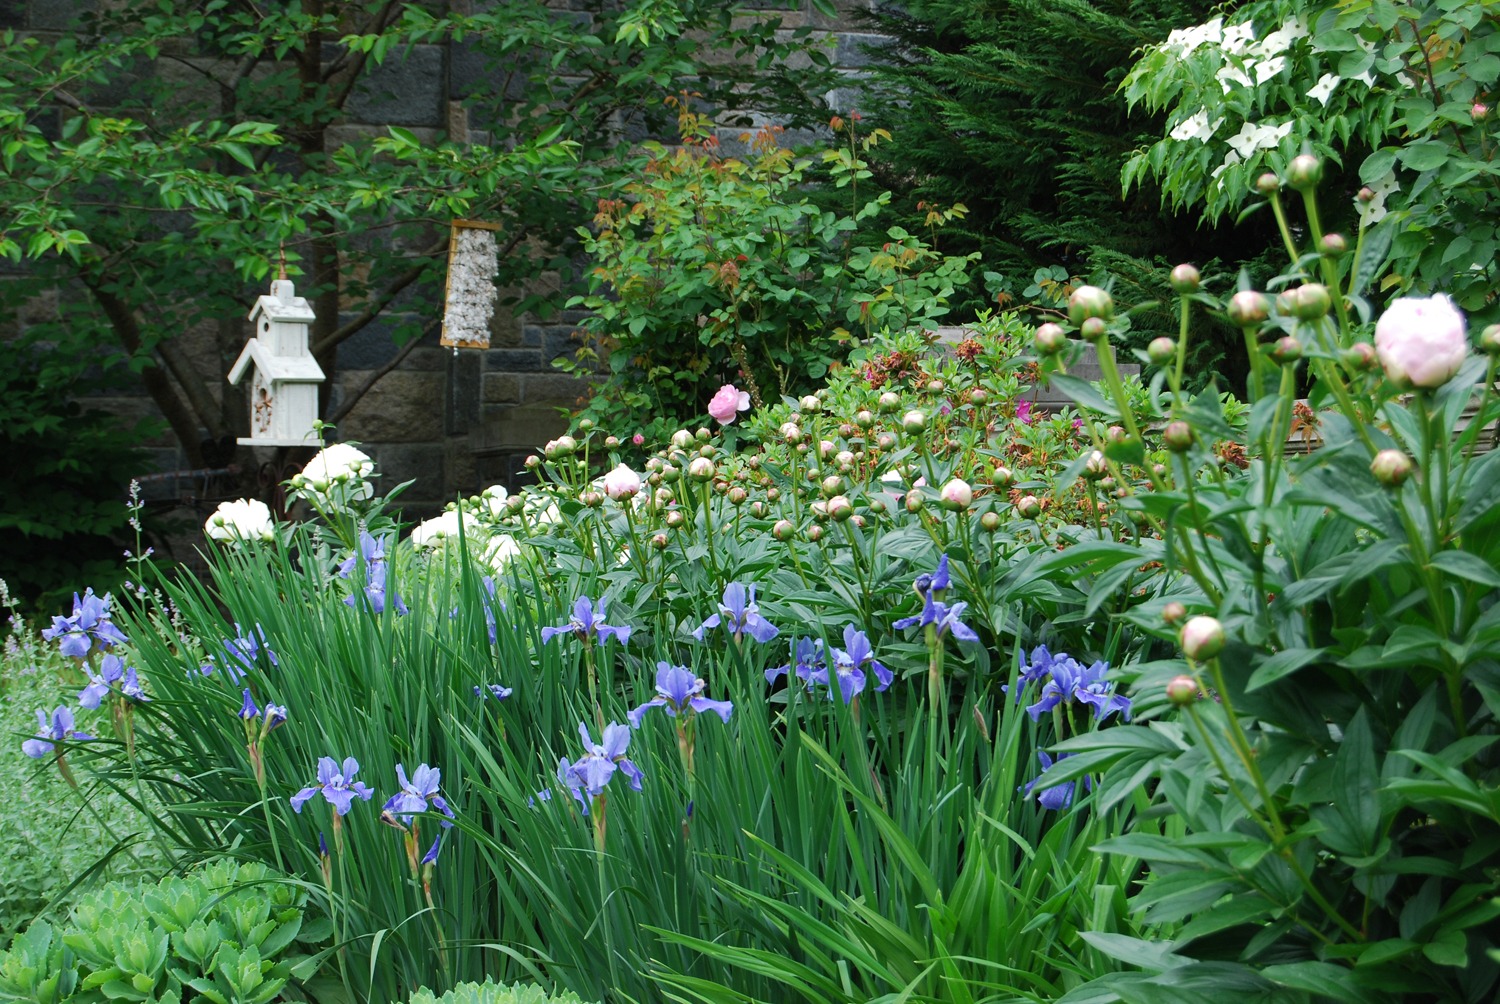 A vibrant garden with purple irises, budding peonies, lush green foliage, a birdhouse, and a bird feeder against a stone wall backdrop.